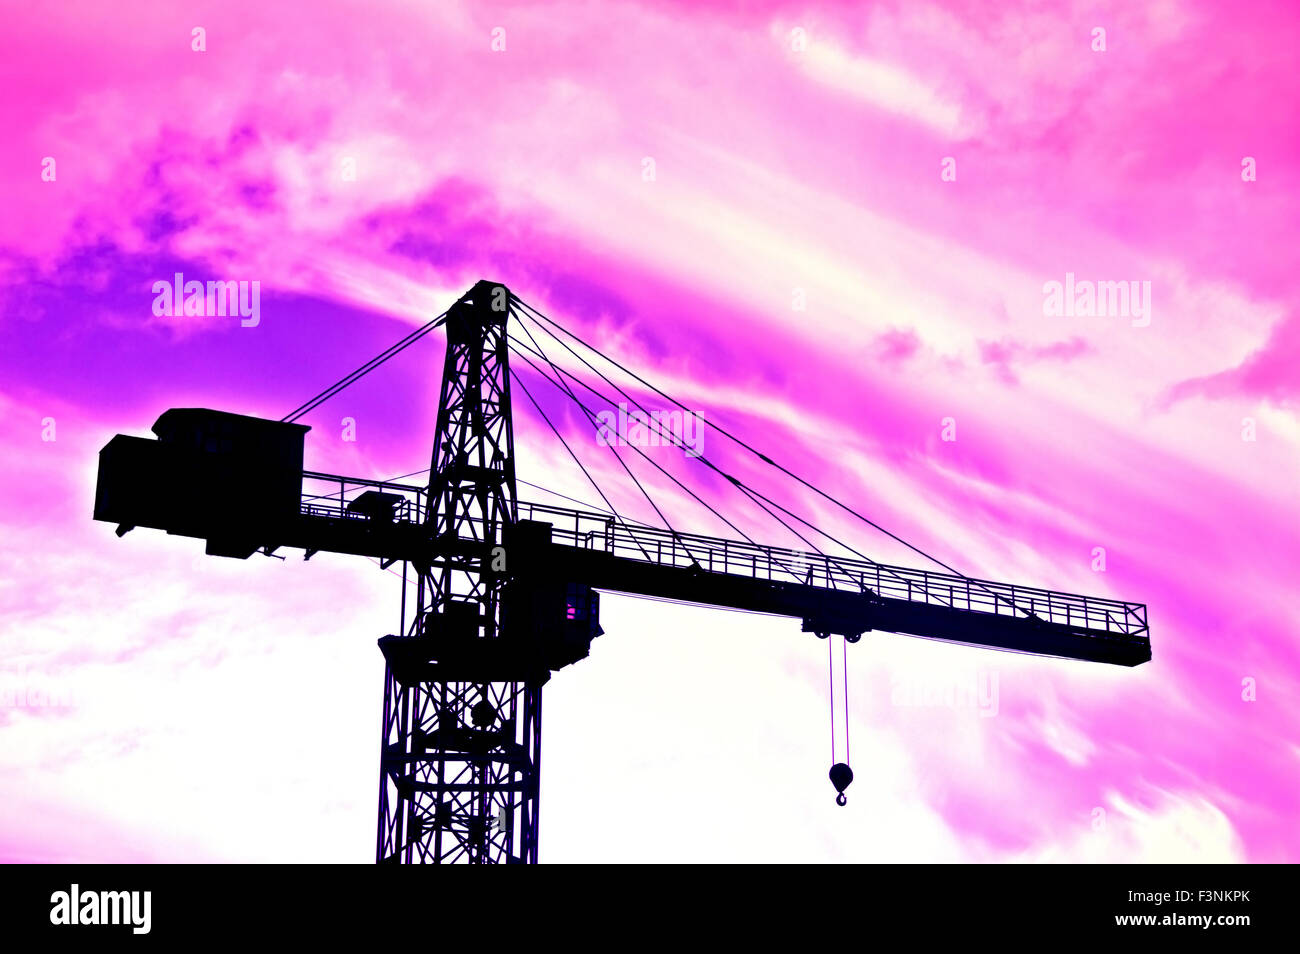 Industrial conceptual image. Purple clouds over industrial area with crane. Stock Photo